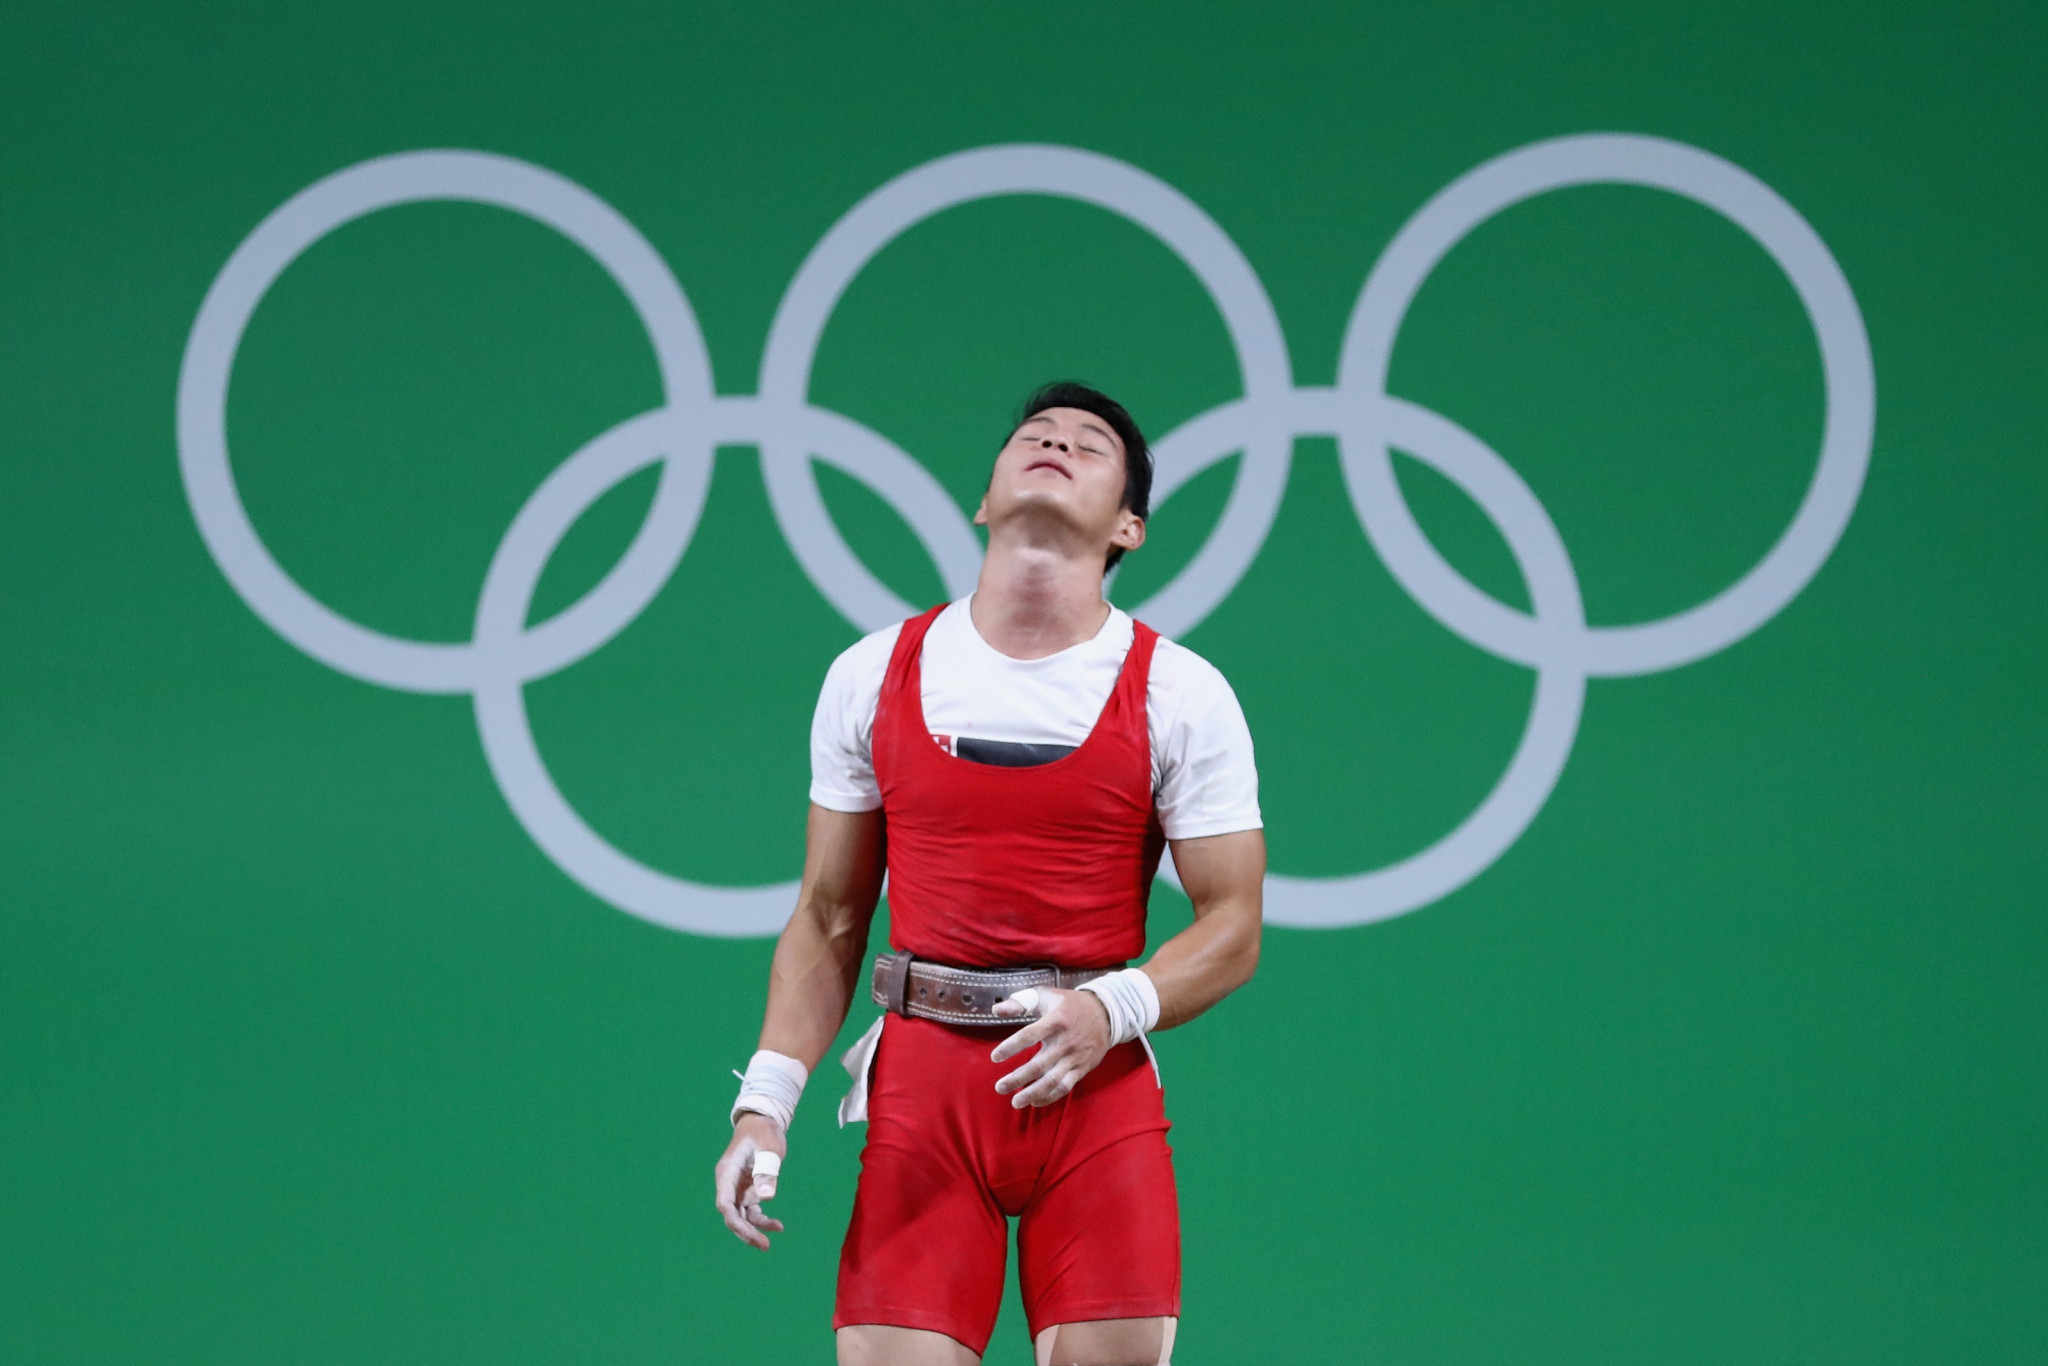 If Vietnam is banned from competing in weightlifting at Tokyo 2020 it would be a blow for  Kim Thuan Thach, a medal contender who has not tested positive ©Getty Images